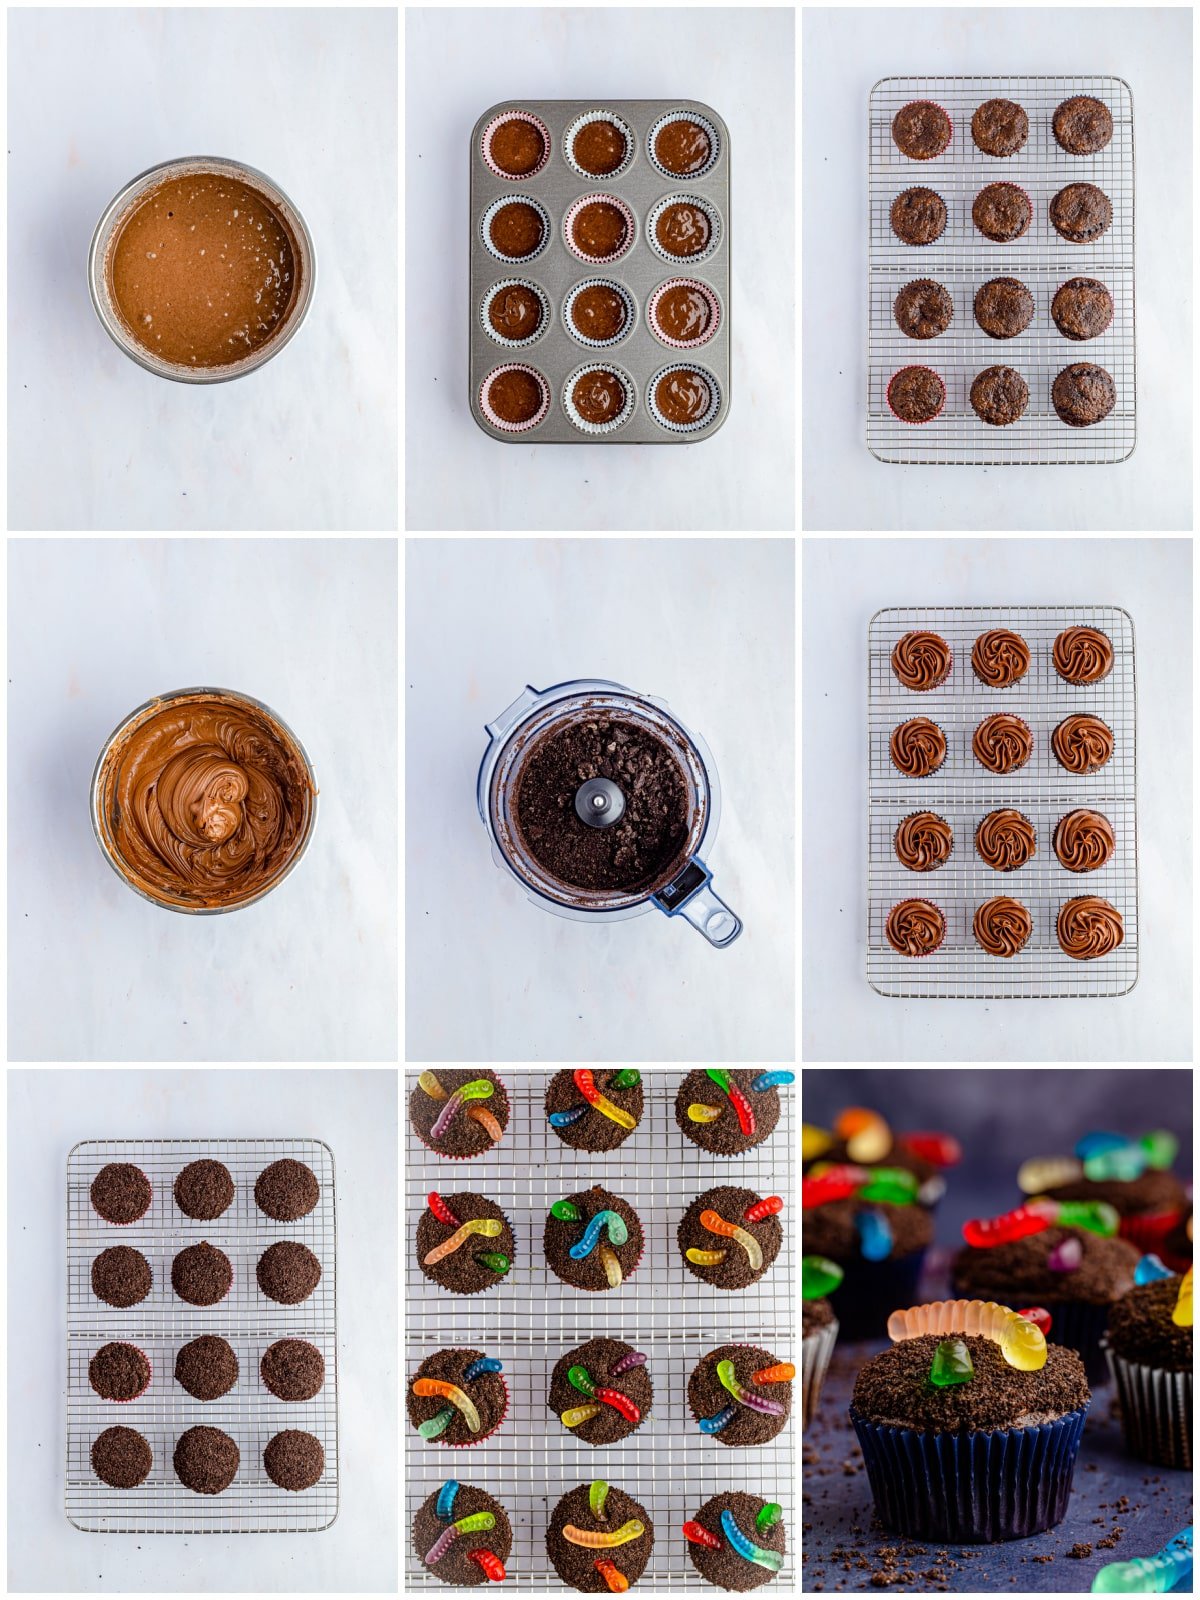 Step by step photos on how to make Dirt Cupcakes.